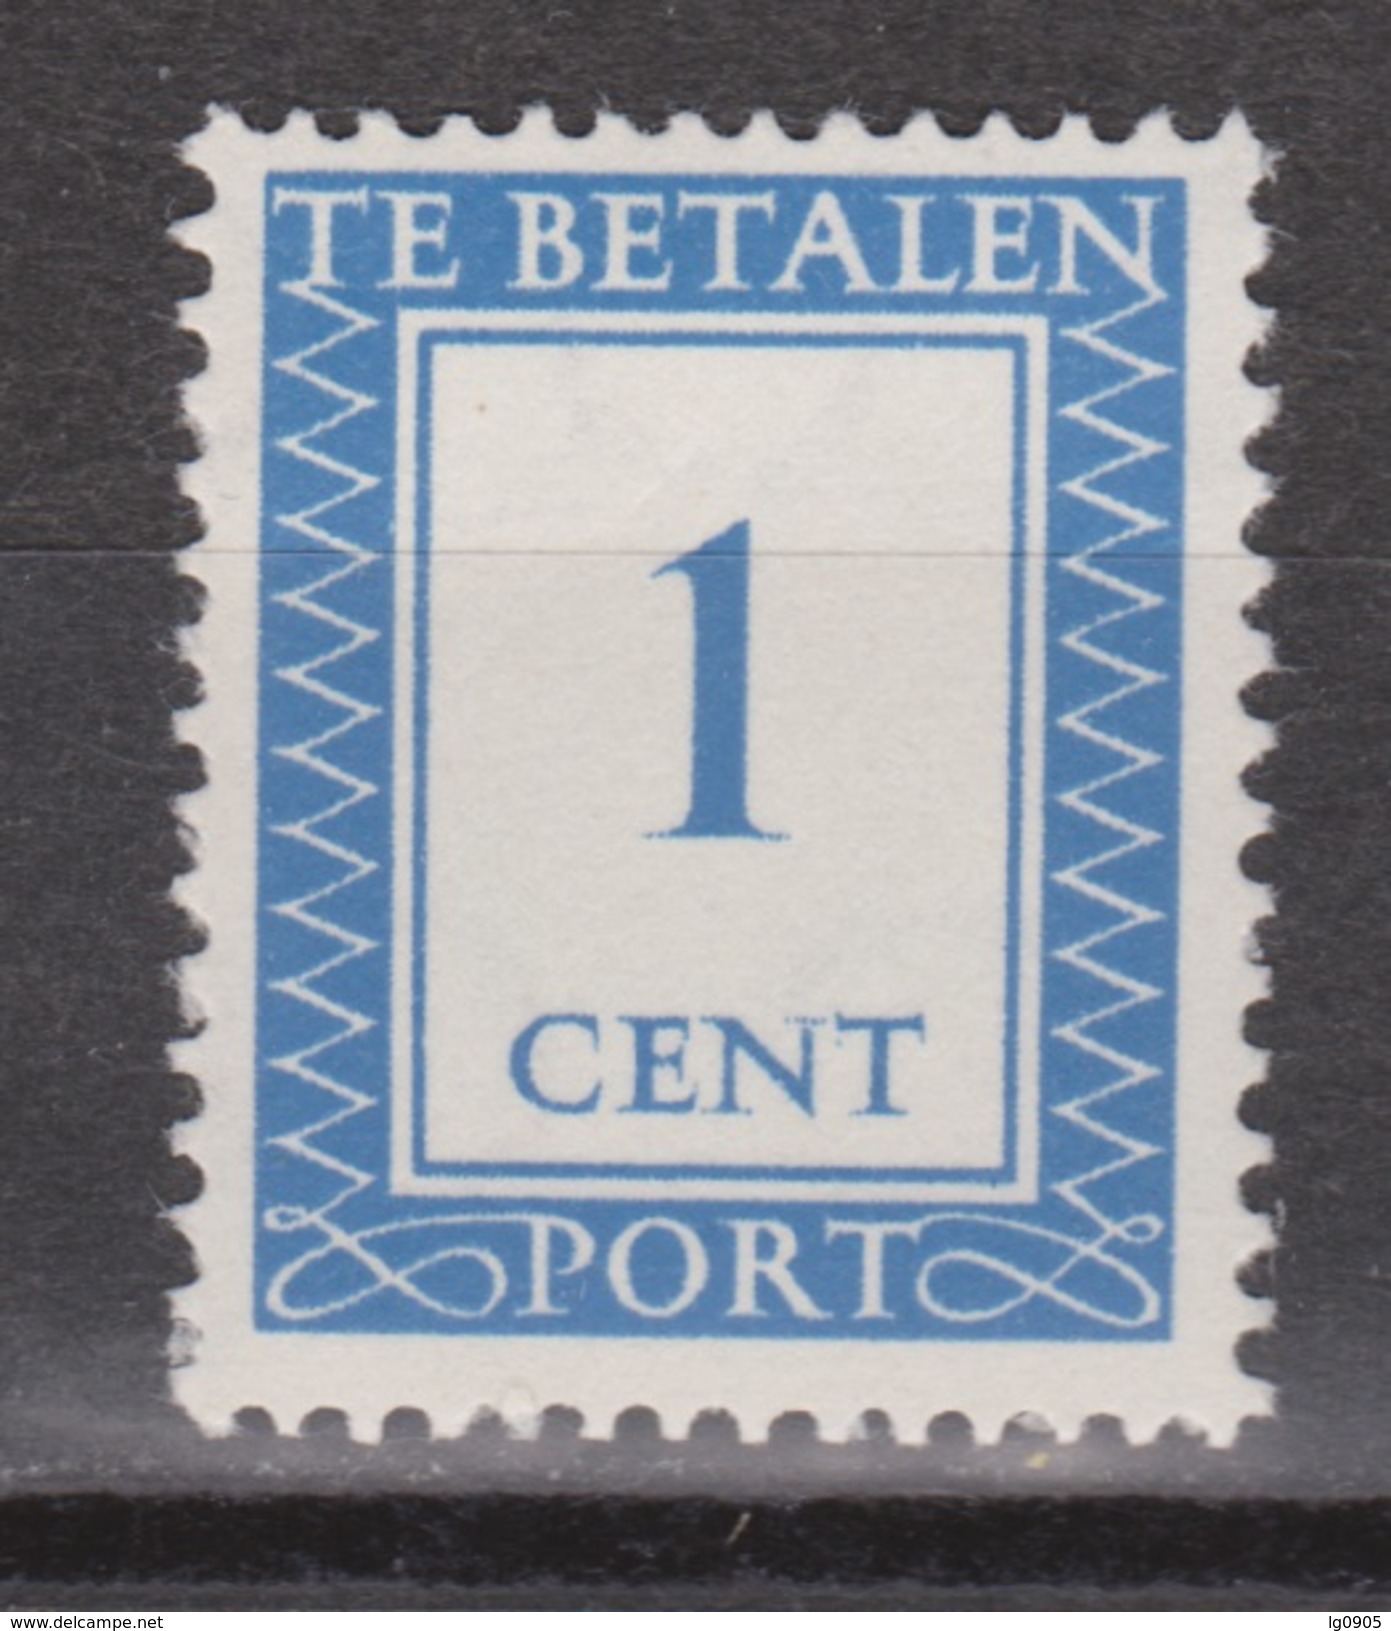 NVPH Nederland Netherlands Holanda Pays Bas Port 80 MLH Timbre-taxe Postmarke Sellos De Correos NOW MANY DUE STAMPS - Strafportzegels